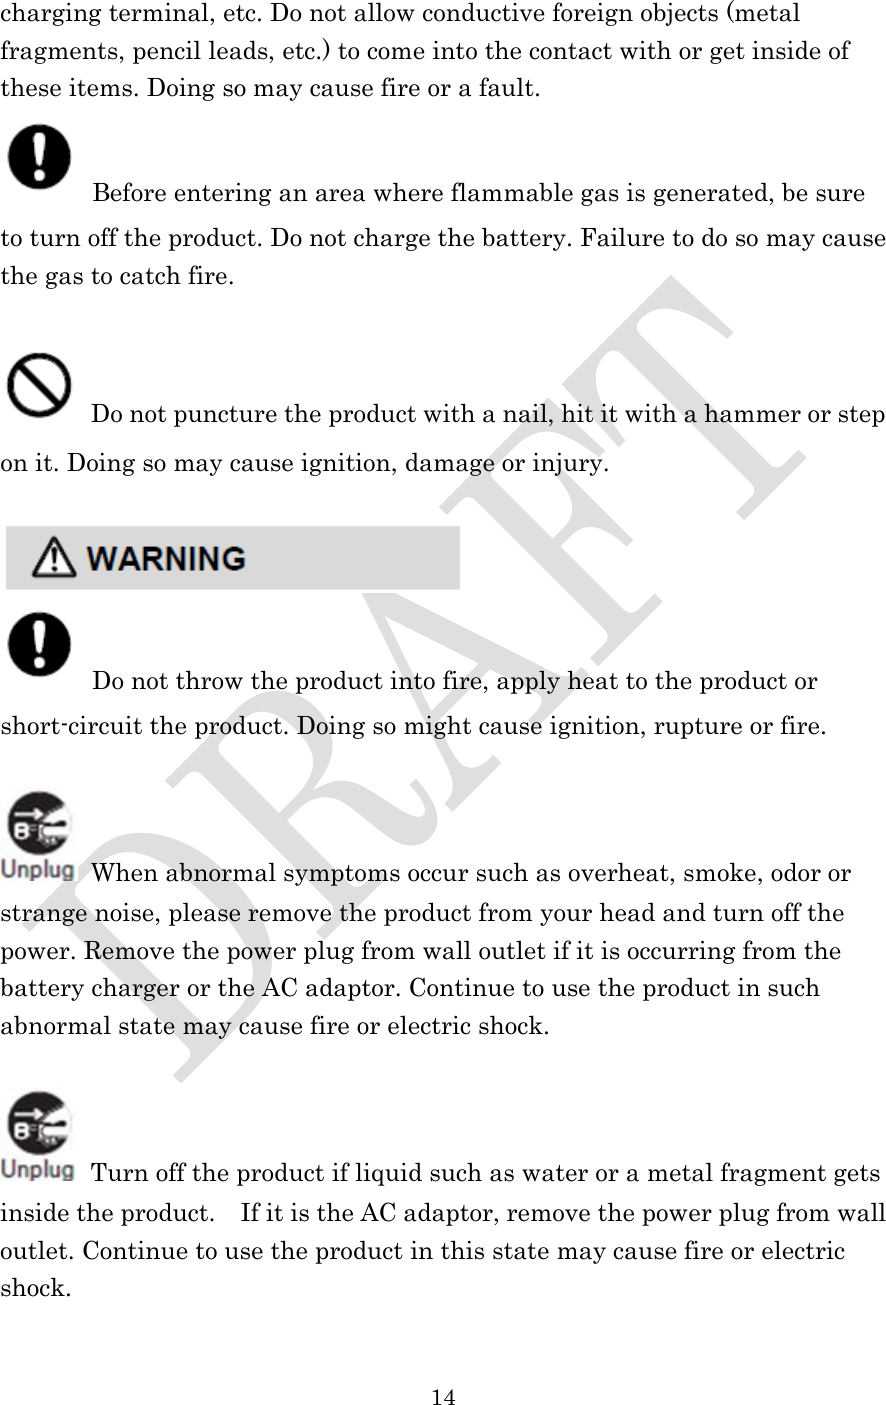  14  charging terminal, etc. Do not allow conductive foreign objects (metal fragments, pencil leads, etc.) to come into the contact with or get inside of these items. Doing so may cause fire or a fault.  Before entering an area where flammable gas is generated, be sure to turn off the product. Do not charge the battery. Failure to do so may cause the gas to catch fire.     Do not puncture the product with a nail, hit it with a hammer or step on it. Doing so may cause ignition, damage or injury.    Do not throw the product into fire, apply heat to the product or short-circuit the product. Doing so might cause ignition, rupture or fire.   When abnormal symptoms occur such as overheat, smoke, odor or strange noise, please remove the product from your head and turn off the power. Remove the power plug from wall outlet if it is occurring from the battery charger or the AC adaptor. Continue to use the product in such abnormal state may cause fire or electric shock.   Turn off the product if liquid such as water or a metal fragment gets inside the product.    If it is the AC adaptor, remove the power plug from wall outlet. Continue to use the product in this state may cause fire or electric shock.  